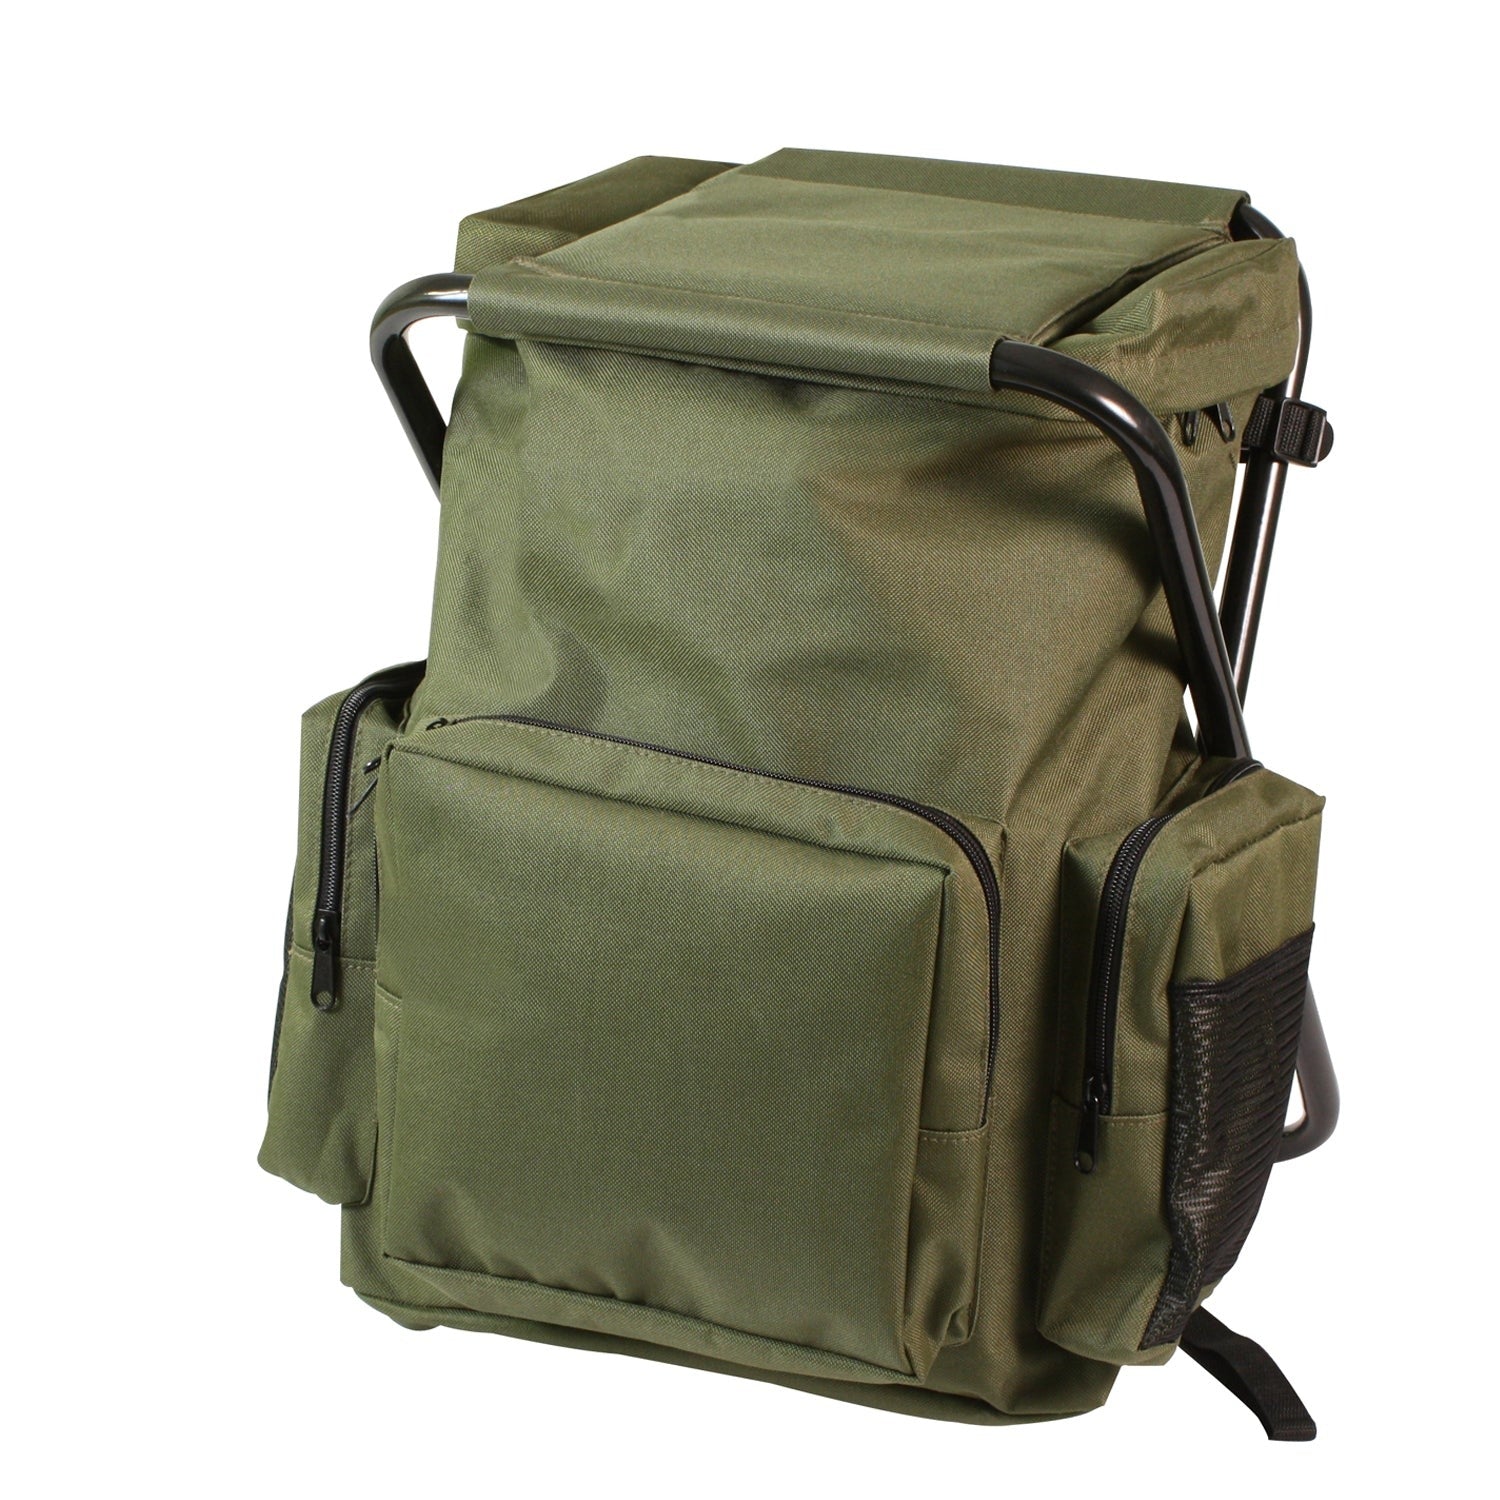 Backpack and Stool Combo Pack - Tactical Choice Plus